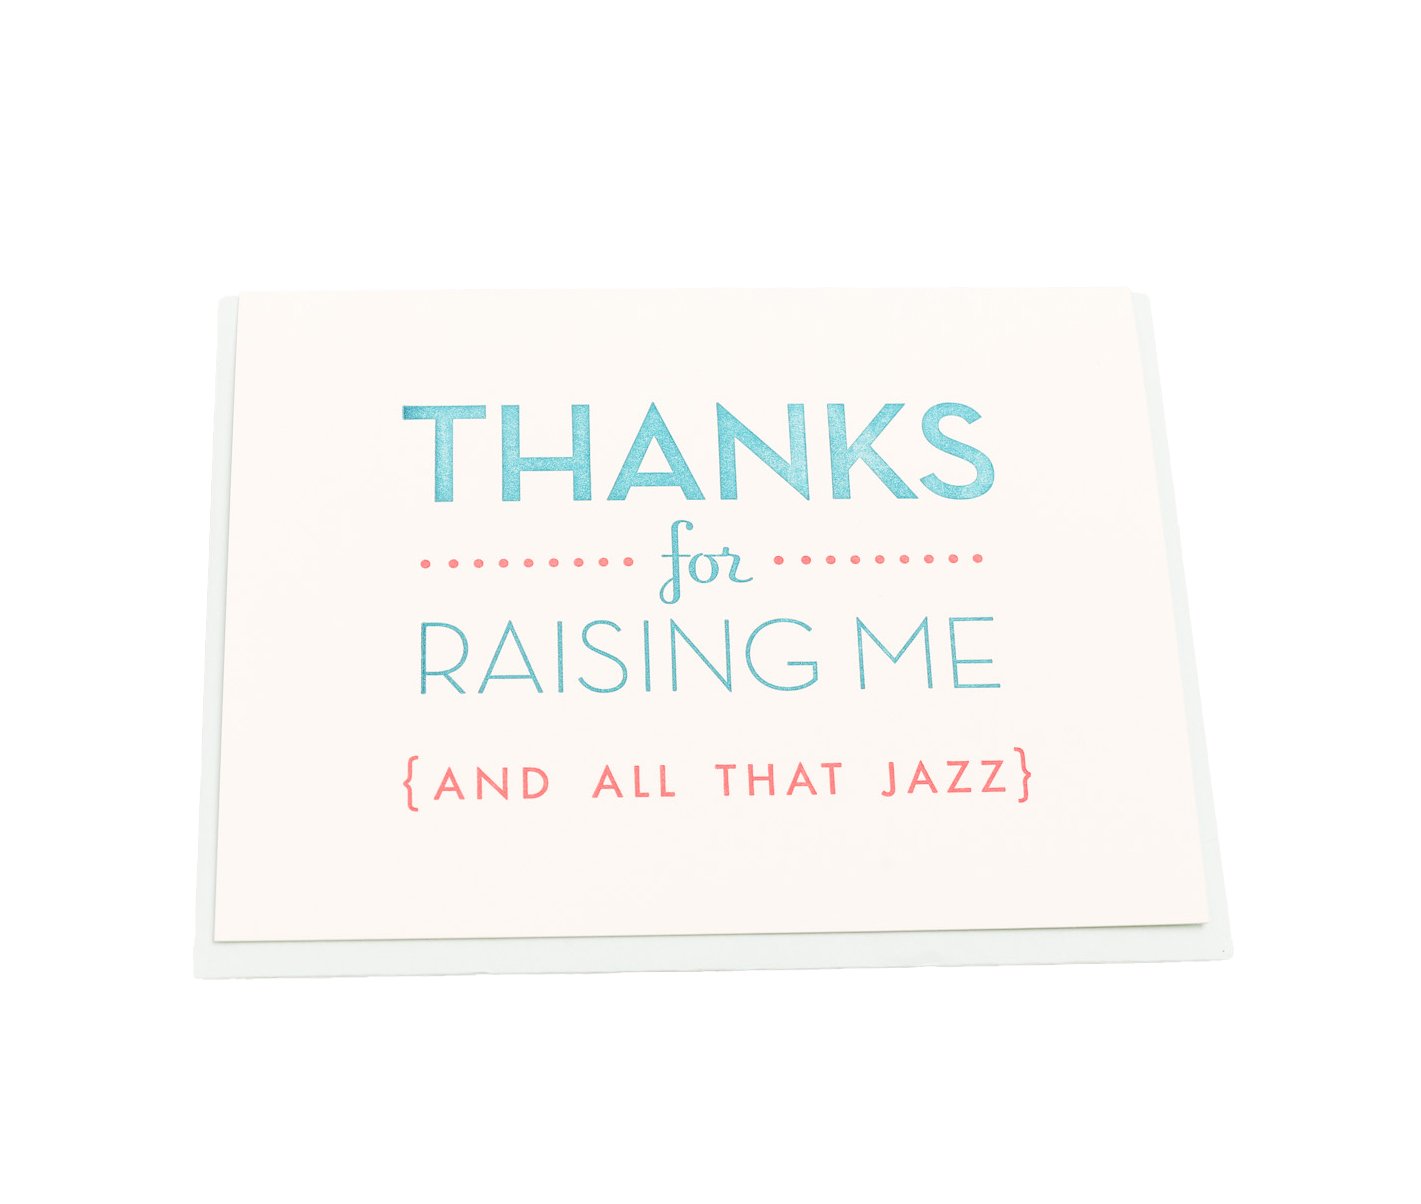 "Thanks for raising me and all that jazz" greeting card